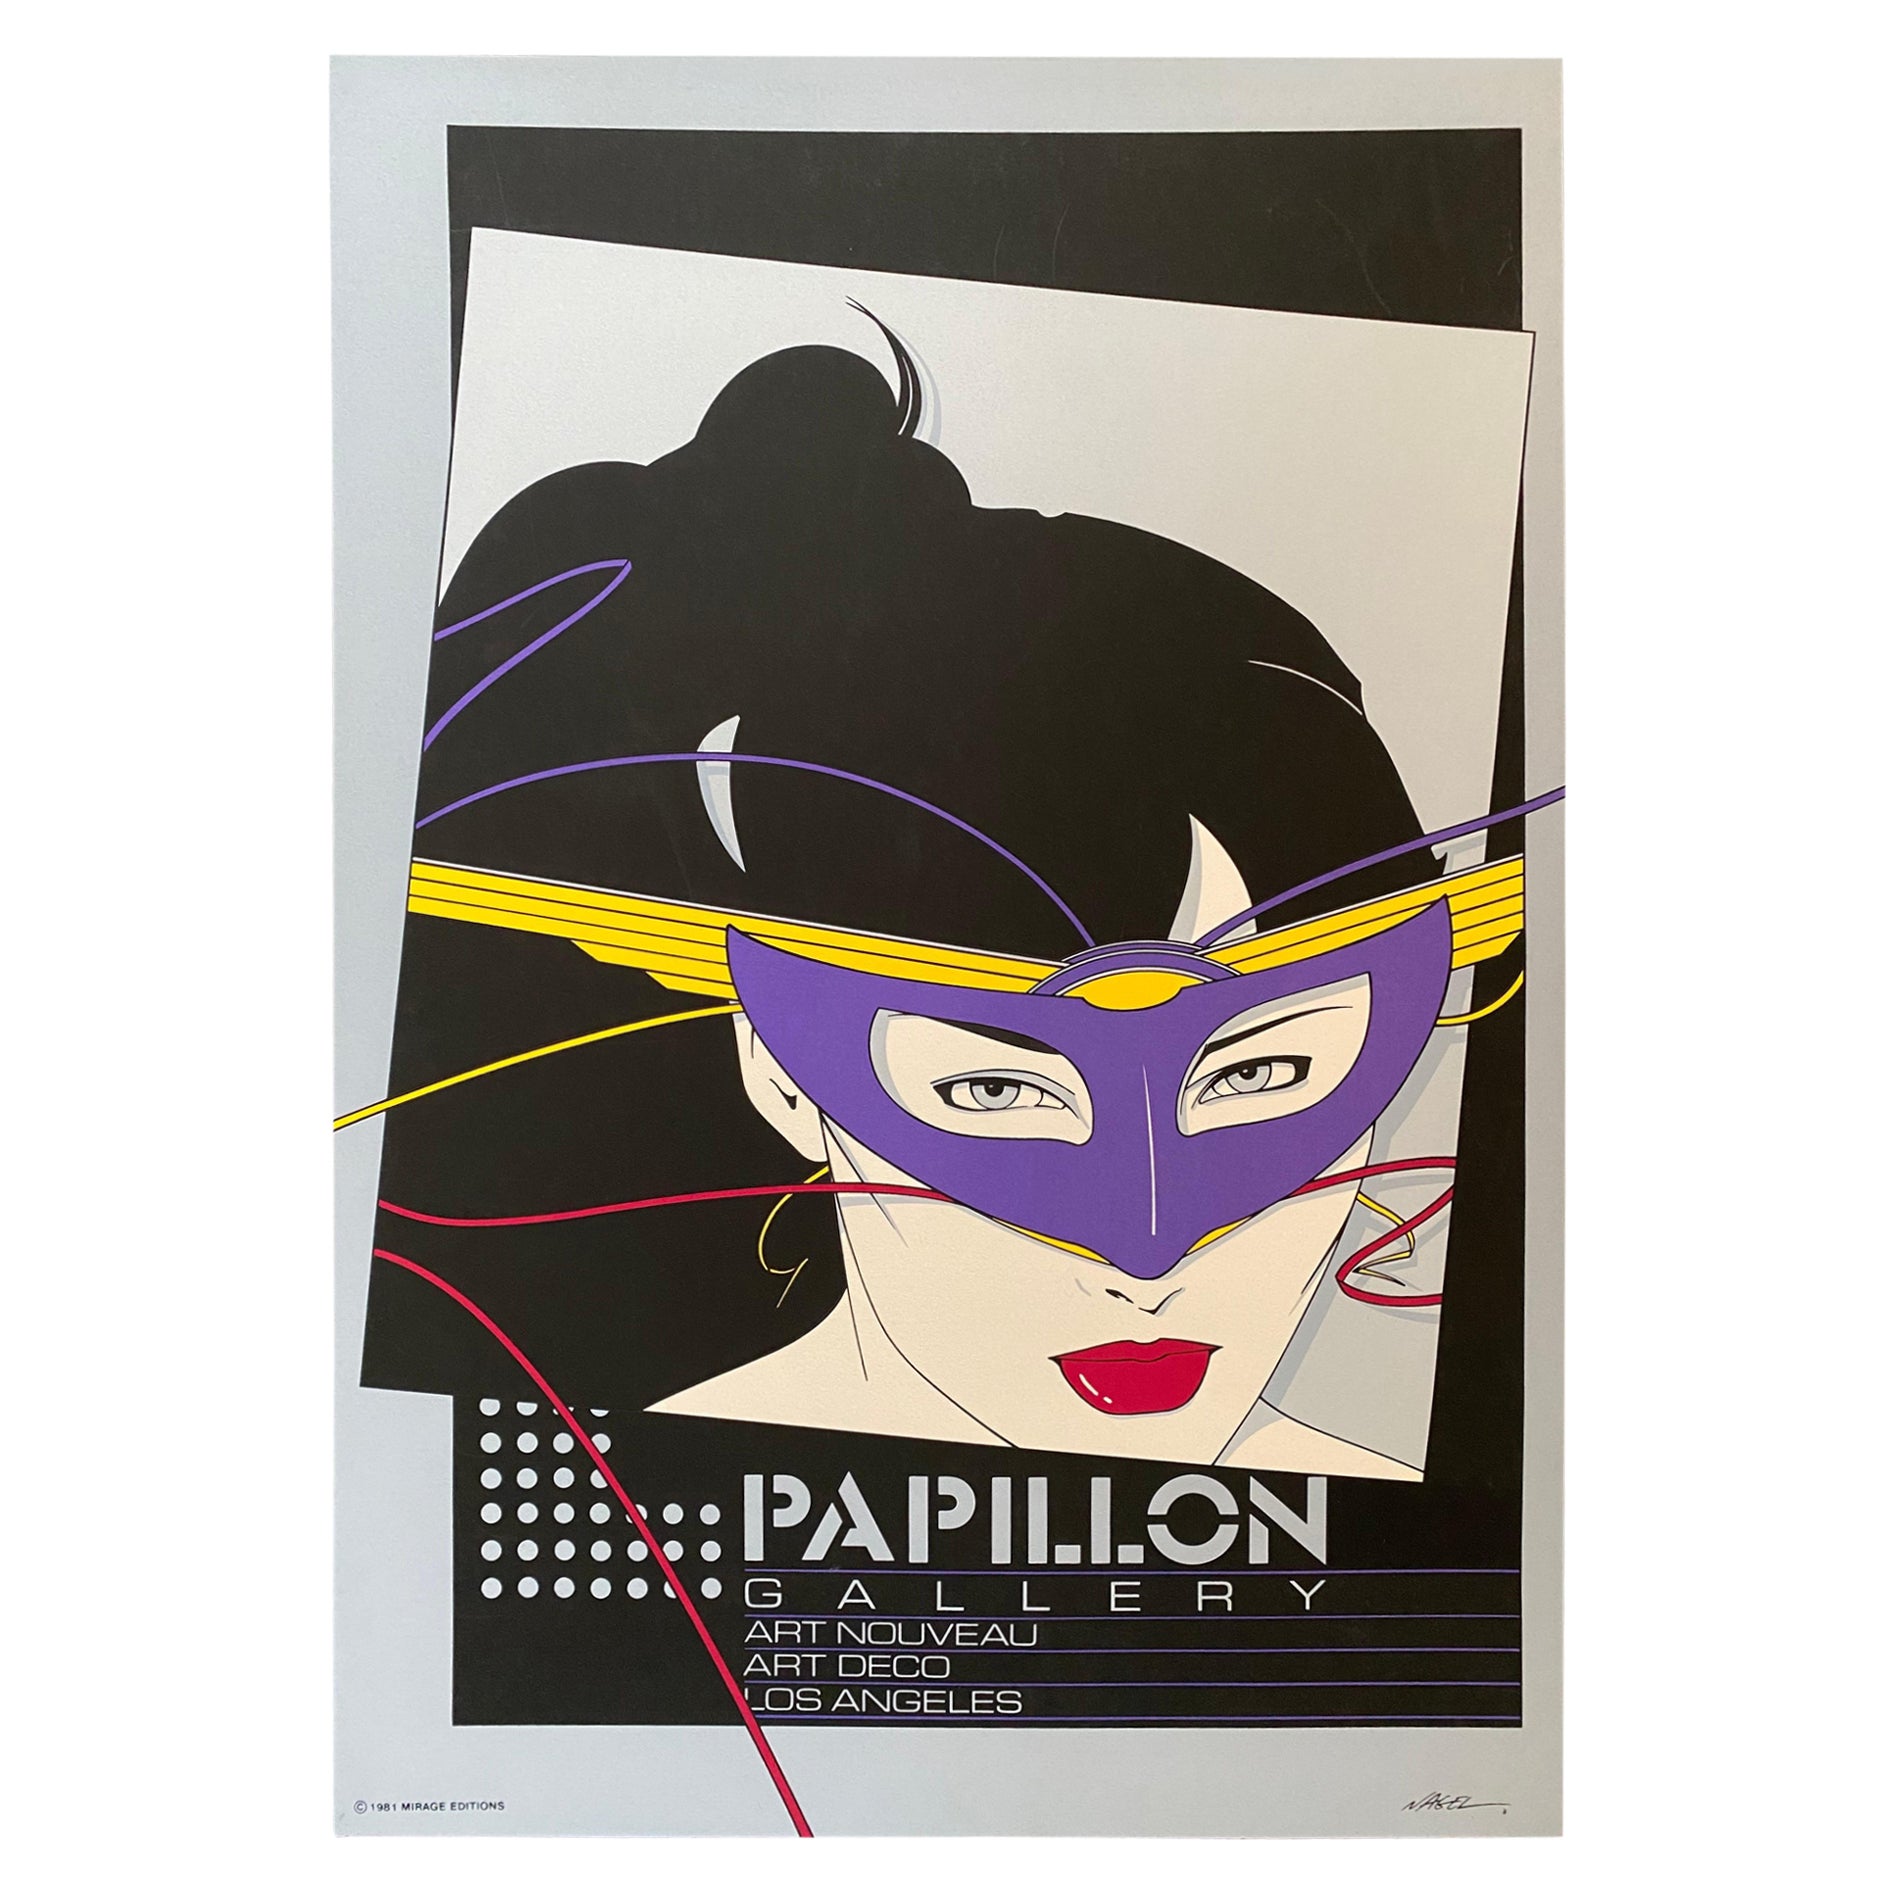 1981 Patrick Nagel Papillon Gallery Los Angeles, Mirage Editions Serigraph For Sale